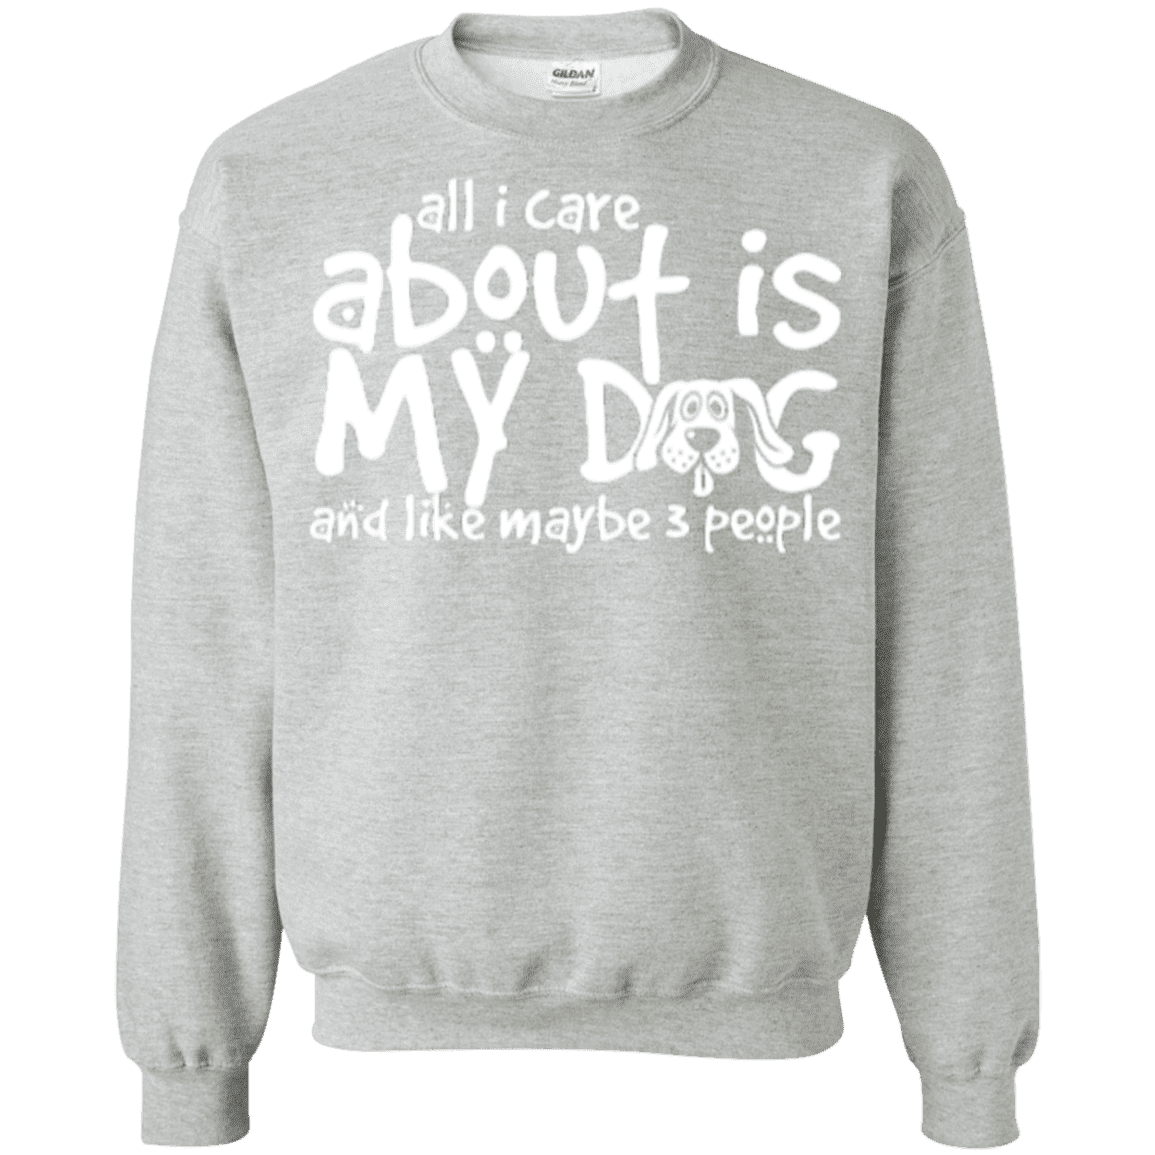 All I Care About Is My Dog - Sweatshirt.